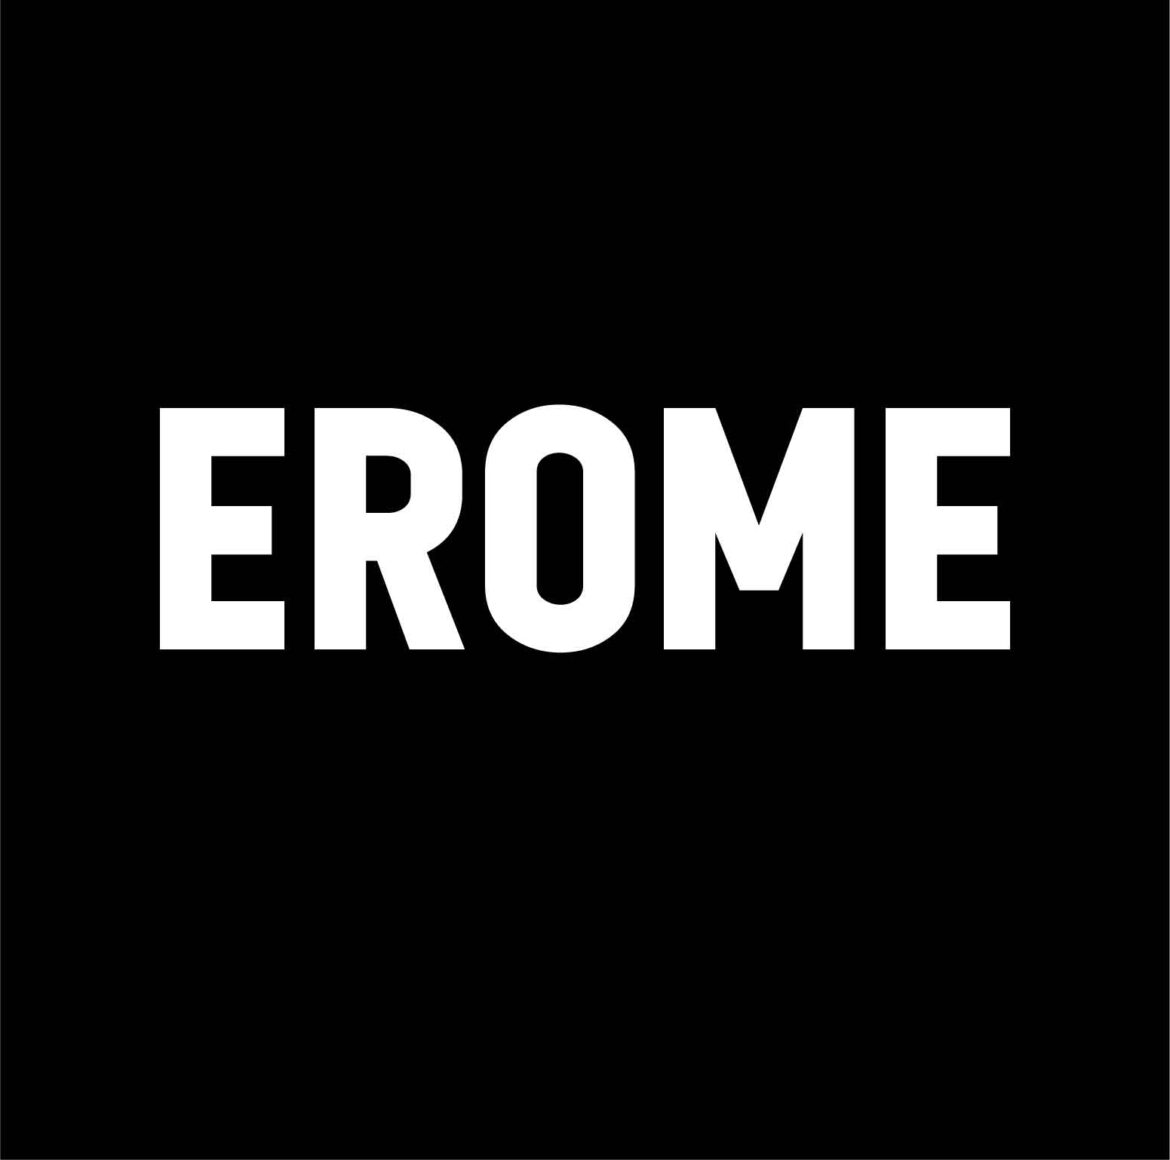 Erome: An In-depth Exploration of the Platform